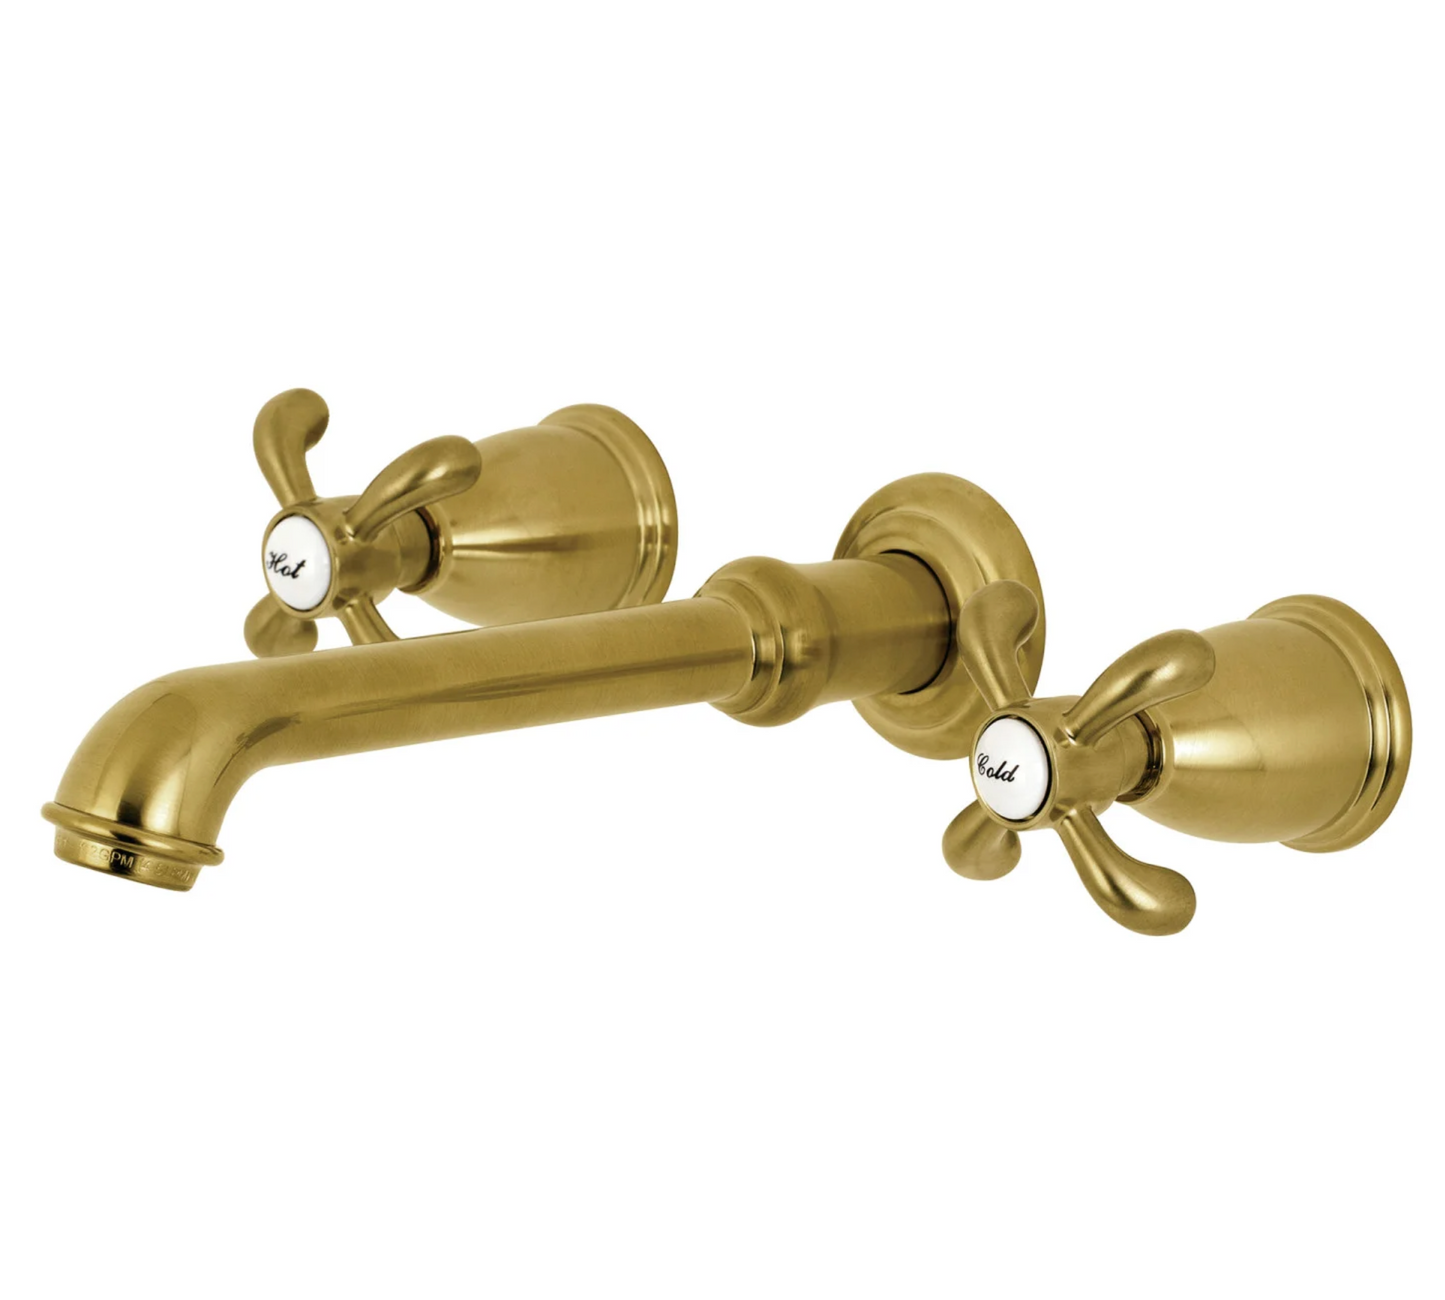 French Country Wall Mount Bathroom Faucet